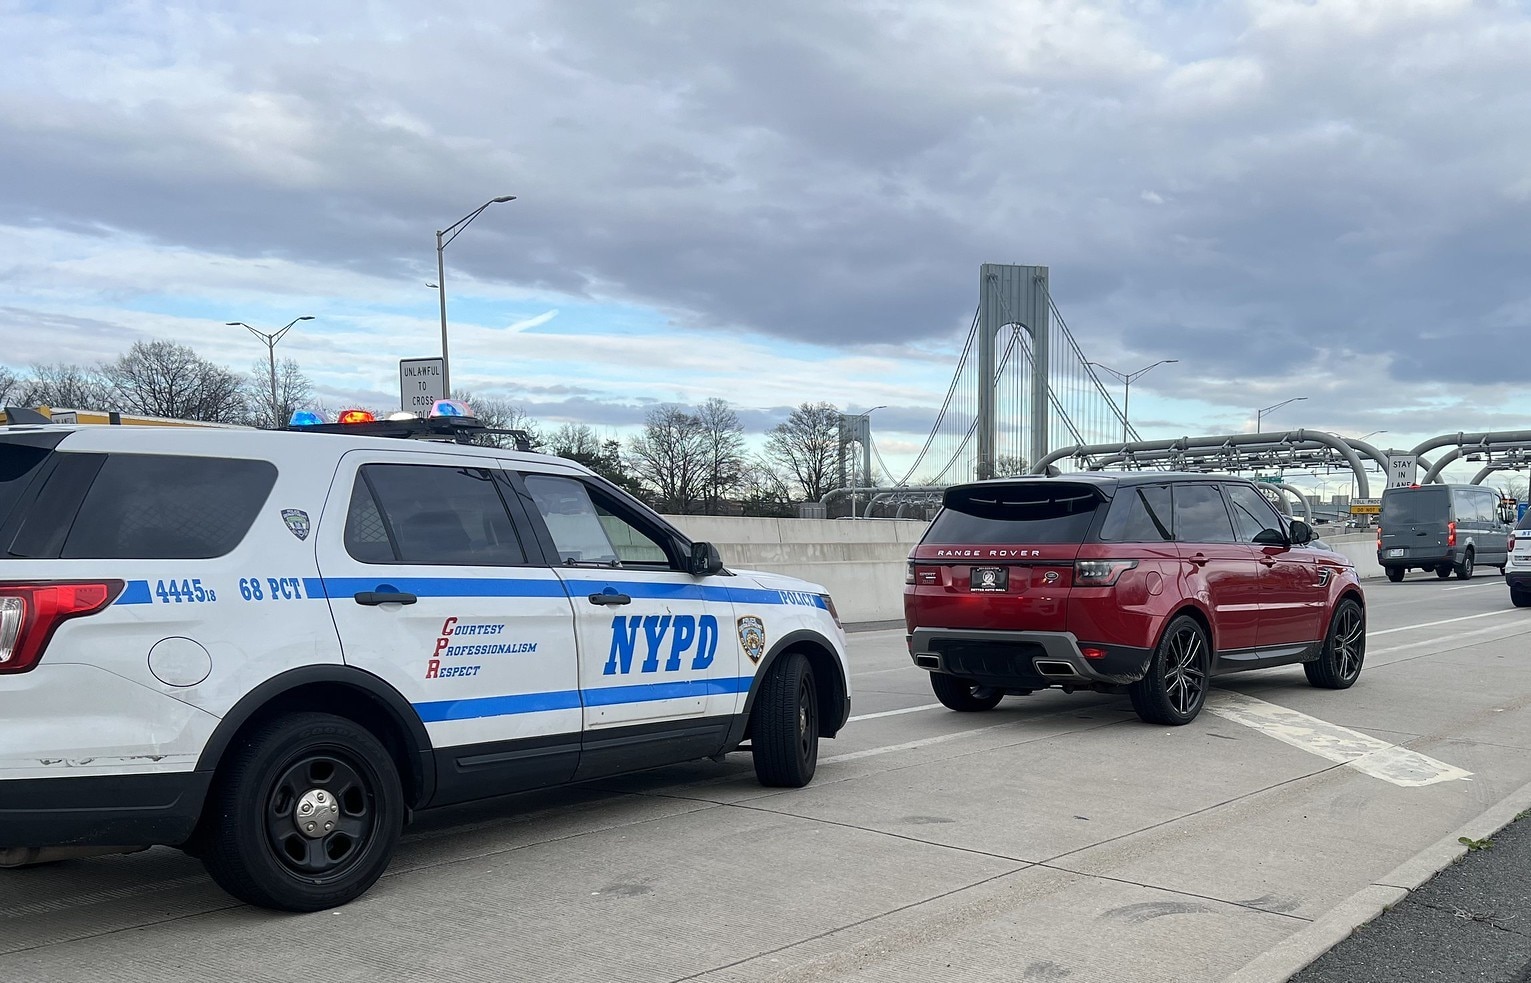 MTA Bridge and Tunnel Officers, NYPD and Law Enforcement Partners Interdict 66 Vehicles of Persistent Toll Violators Who Owe Over $700,000 Combined